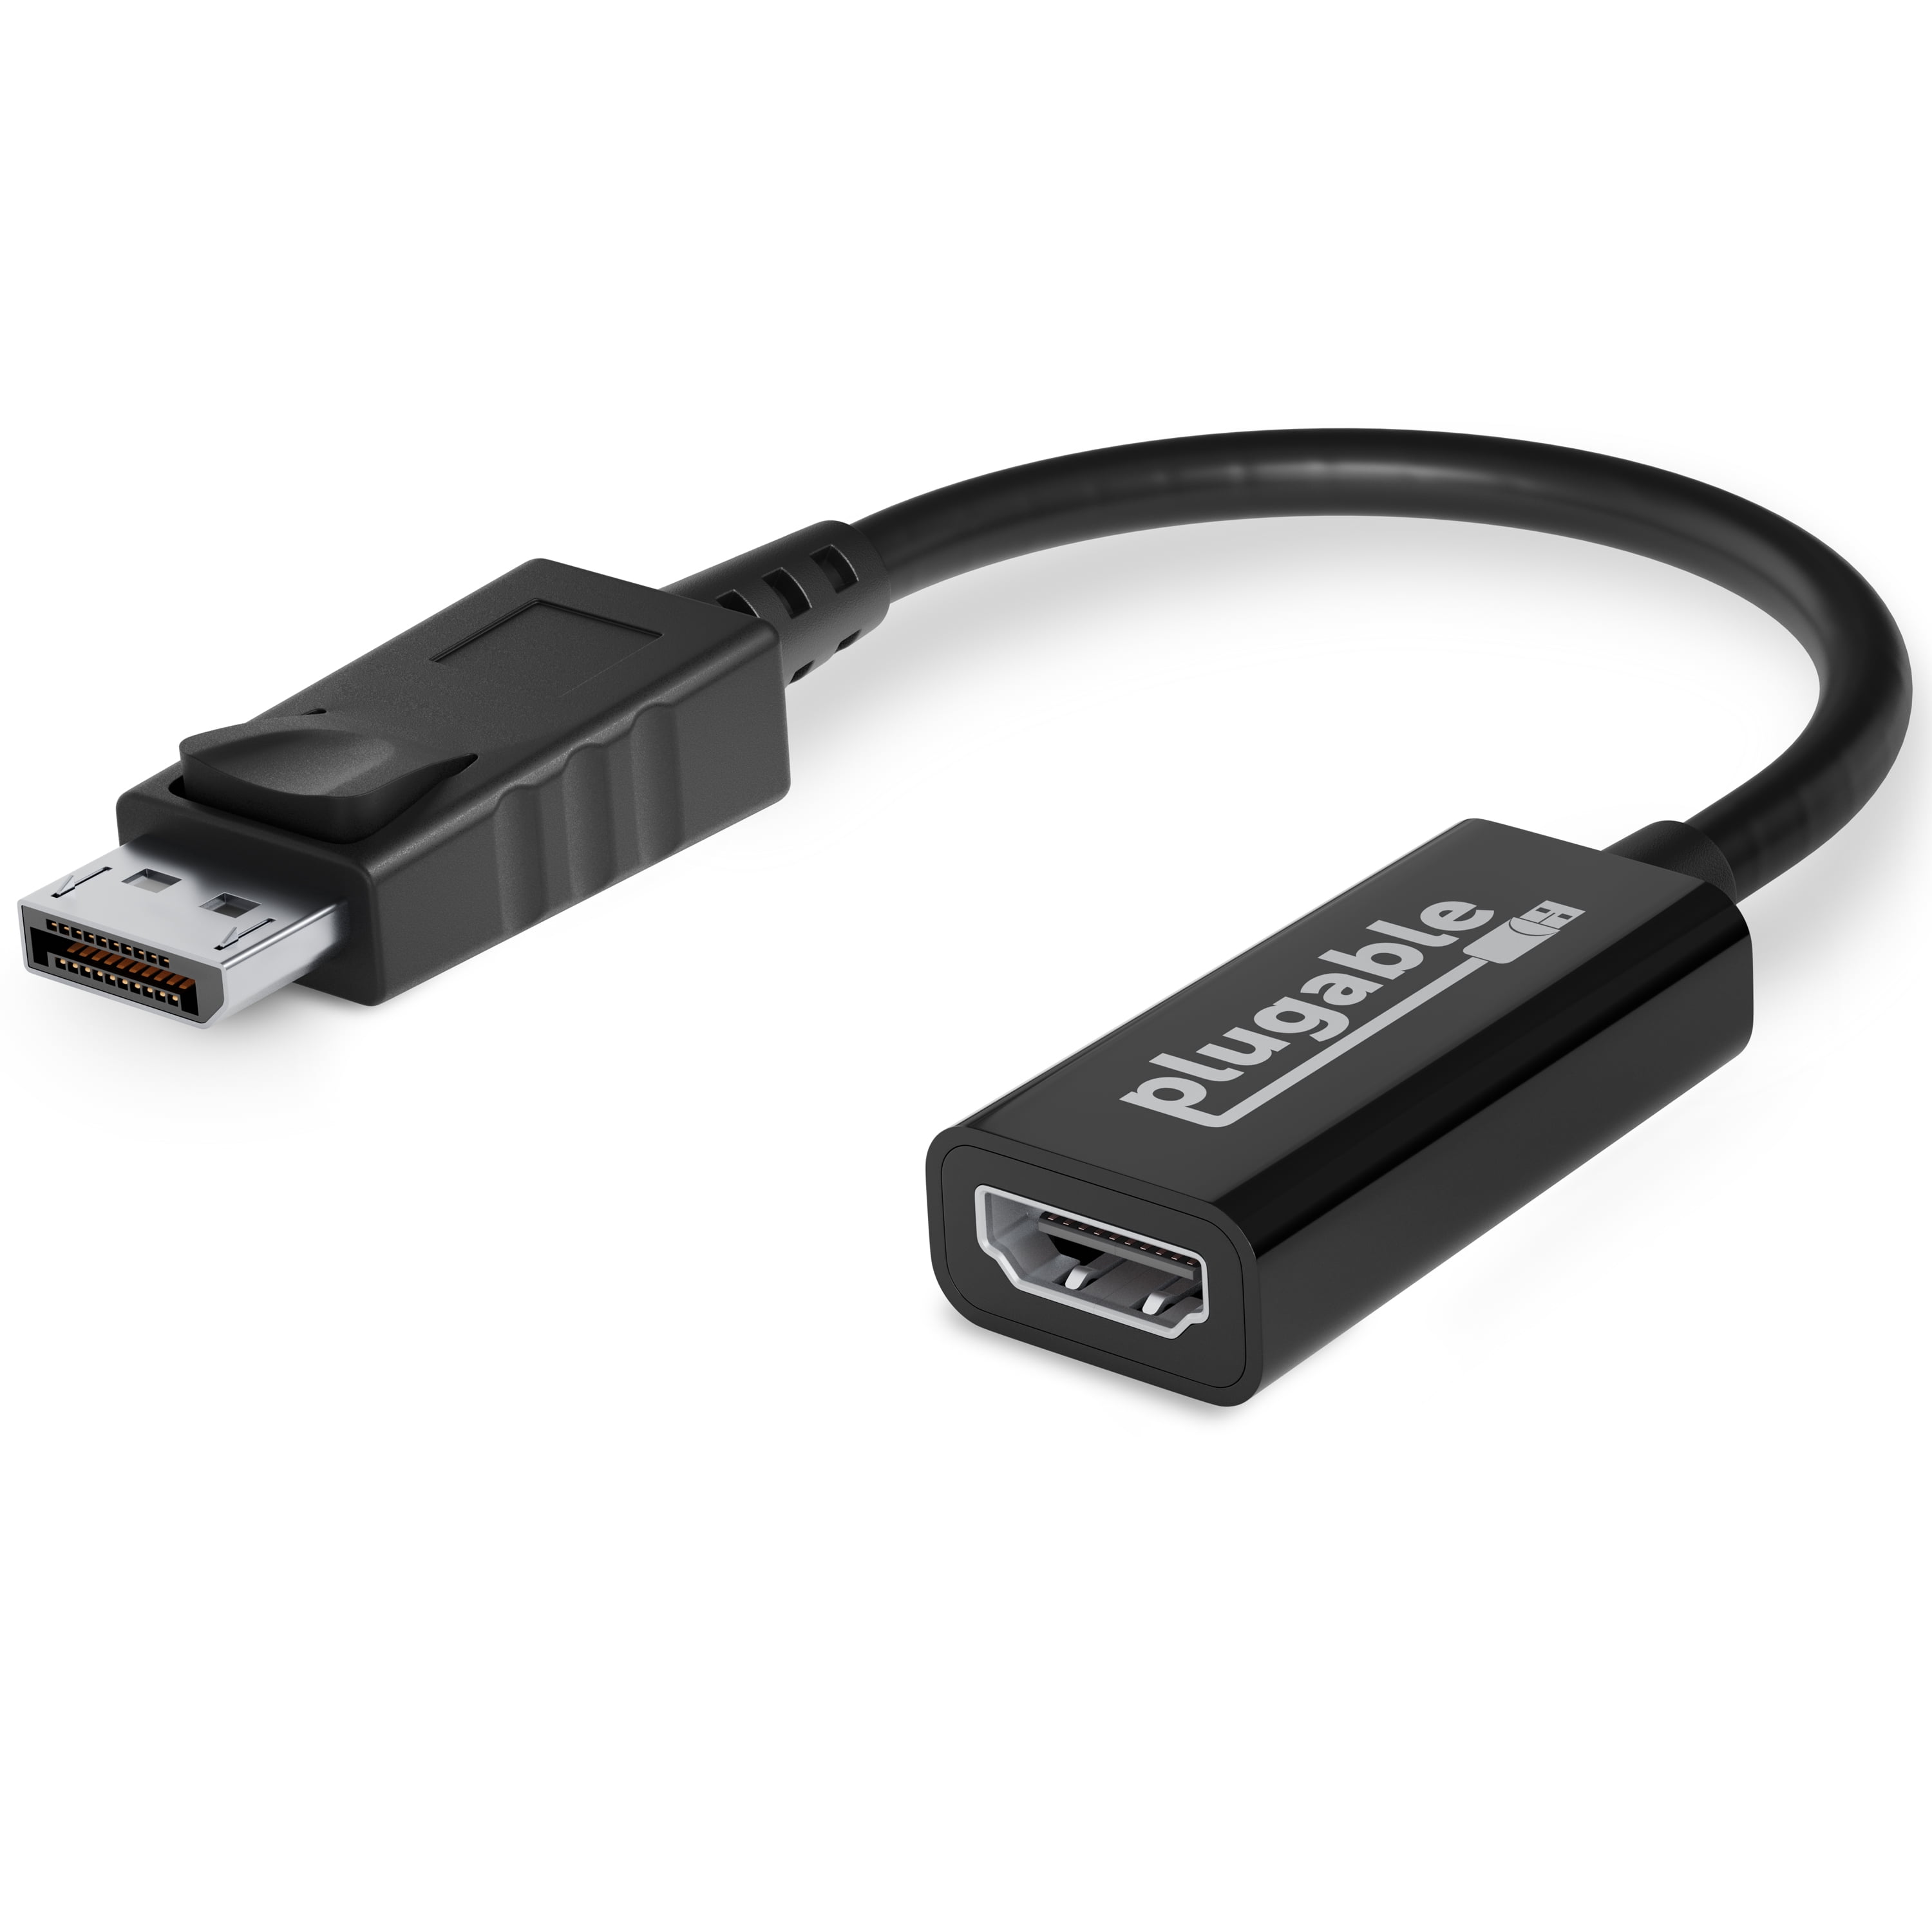 60Hz Converter Cable Supporting Up to 1920 x 1080 Plugable HDMI to VGA Adapter 6 Foot 1.8 Meter 